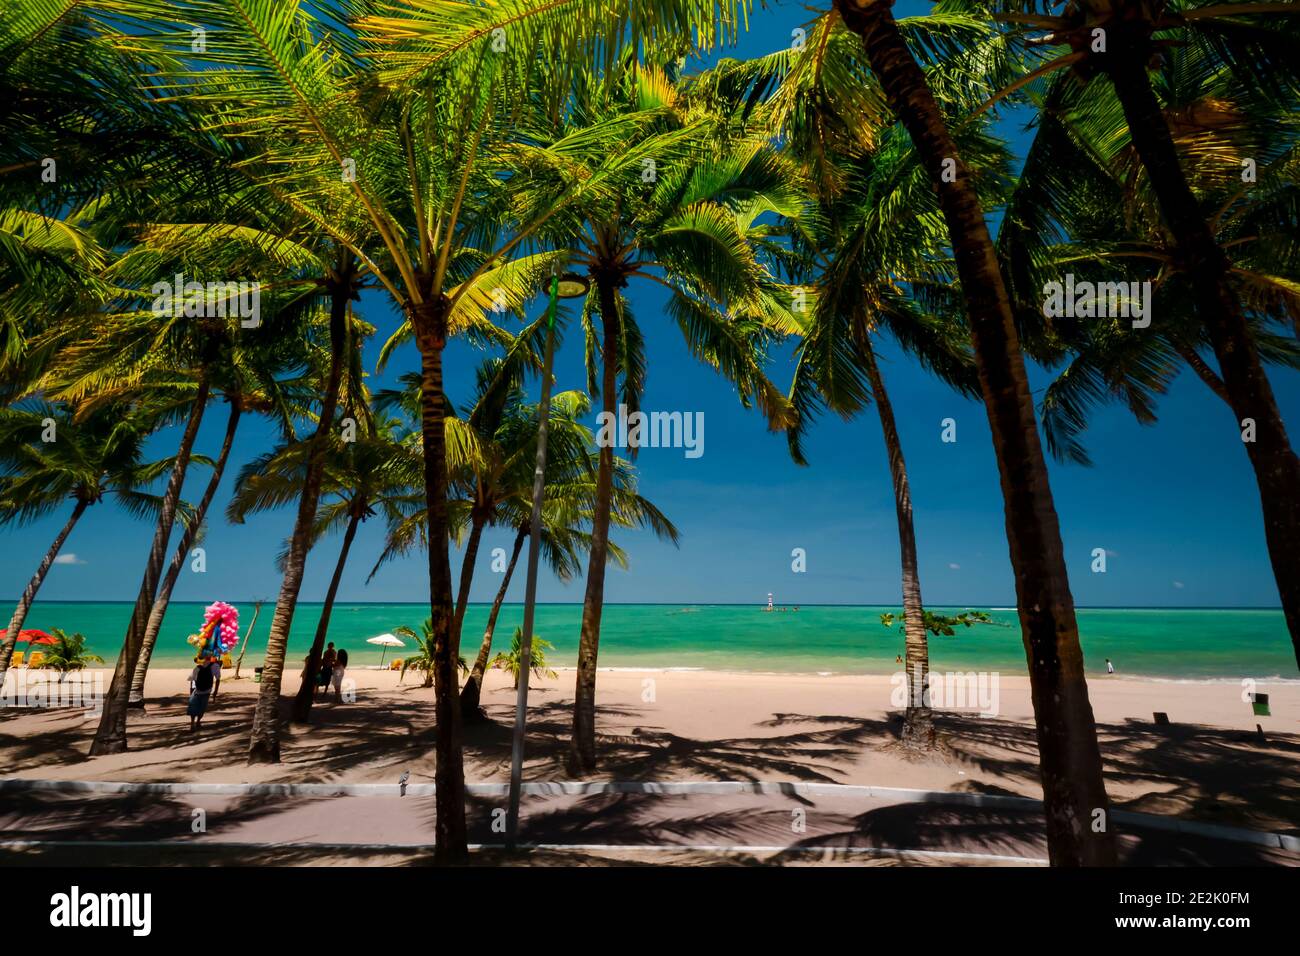 Large palm trees and turquoise waters on a beach in Maceió, Brazil Stock Photo